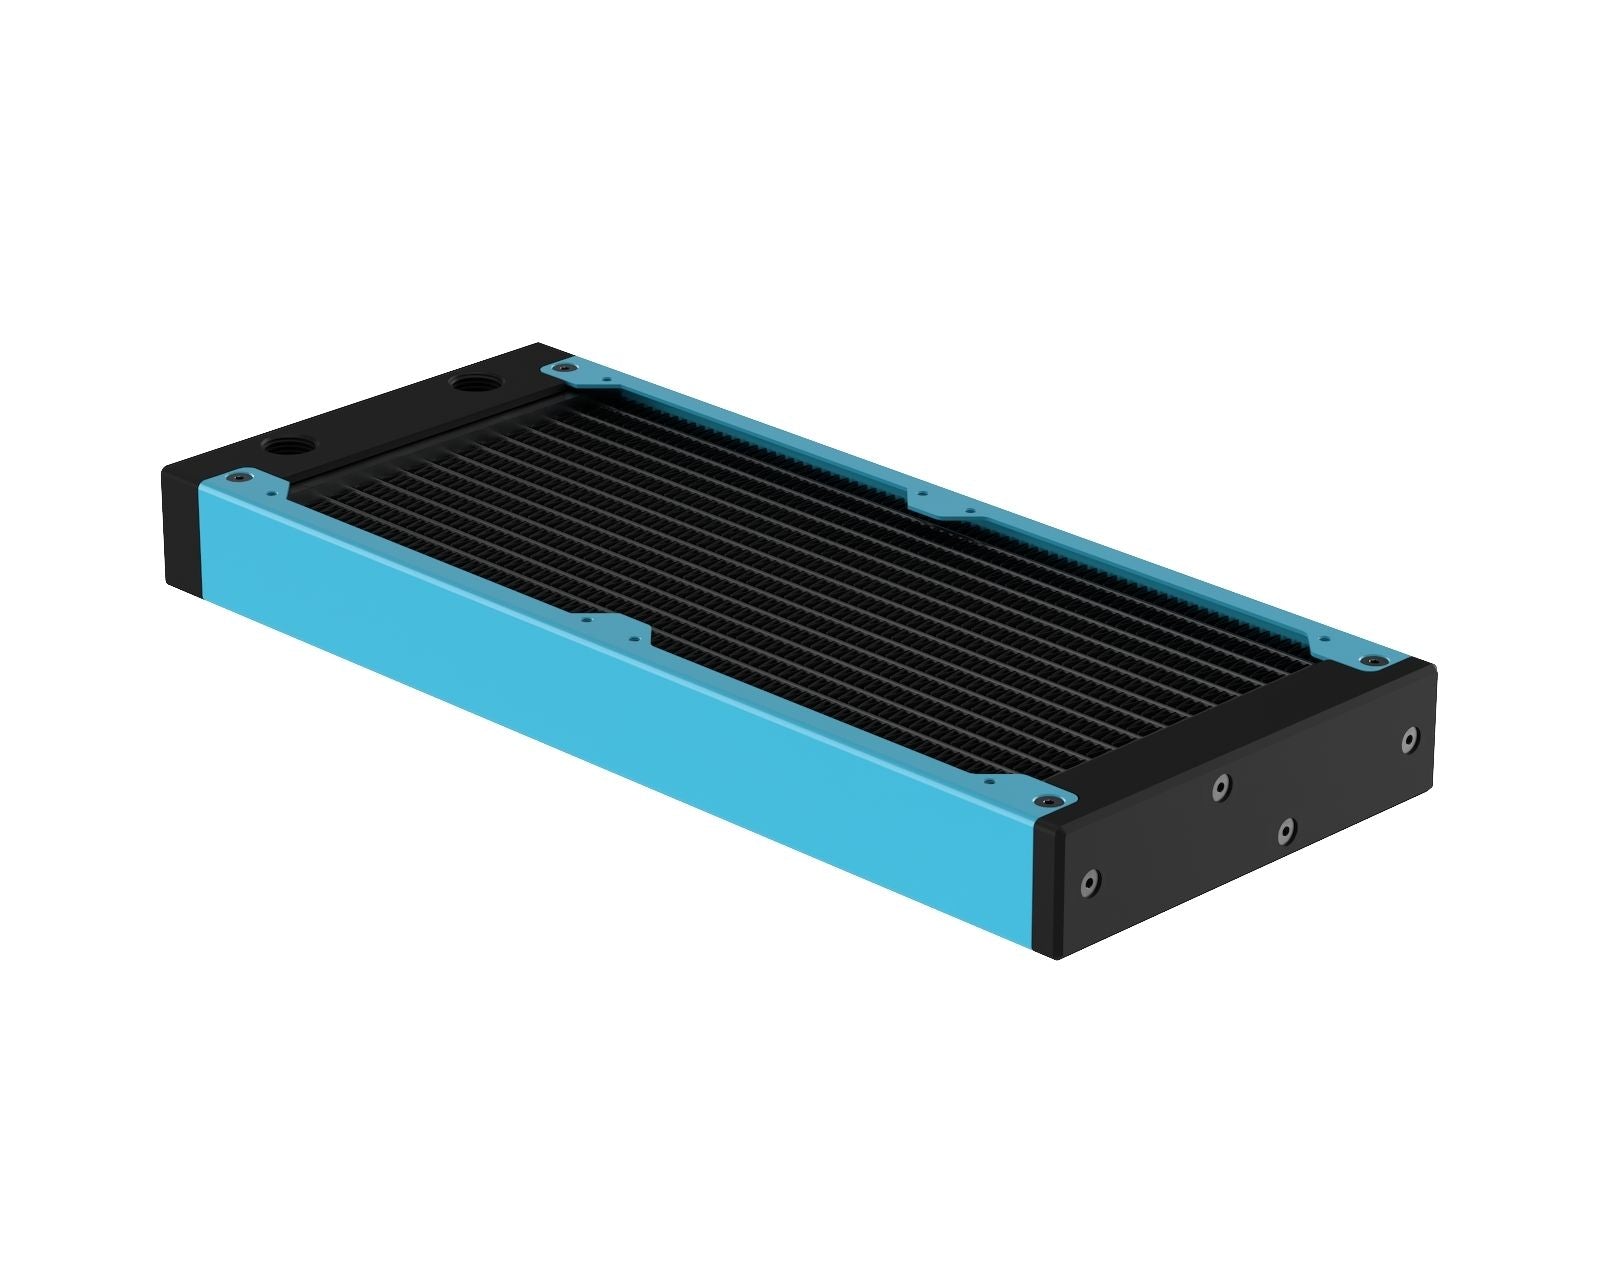 PrimoChill 240SL (30mm) EXIMO Modular Radiator, Black POM, 2x120mm, Dual Fan (R-SL-BK24) Available in 20+ Colors, Assembled in USA and Custom Watercooling Loop Ready - Sky Blue